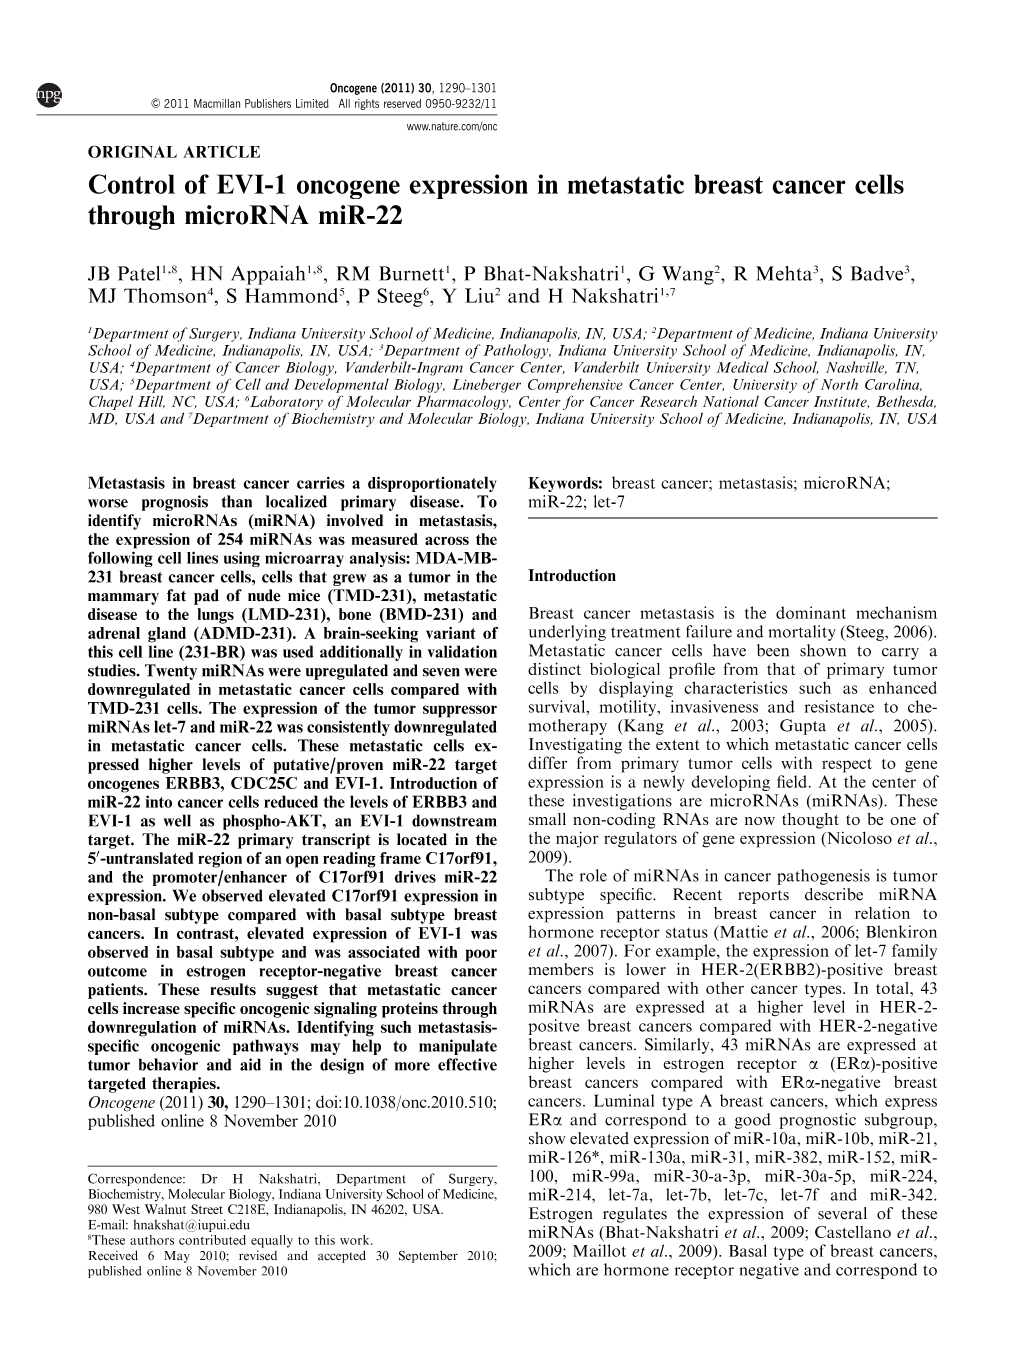 Control of EVI-1 Oncogene Expression in Metastatic Breast Cancer Cells Through Microrna Mir-22